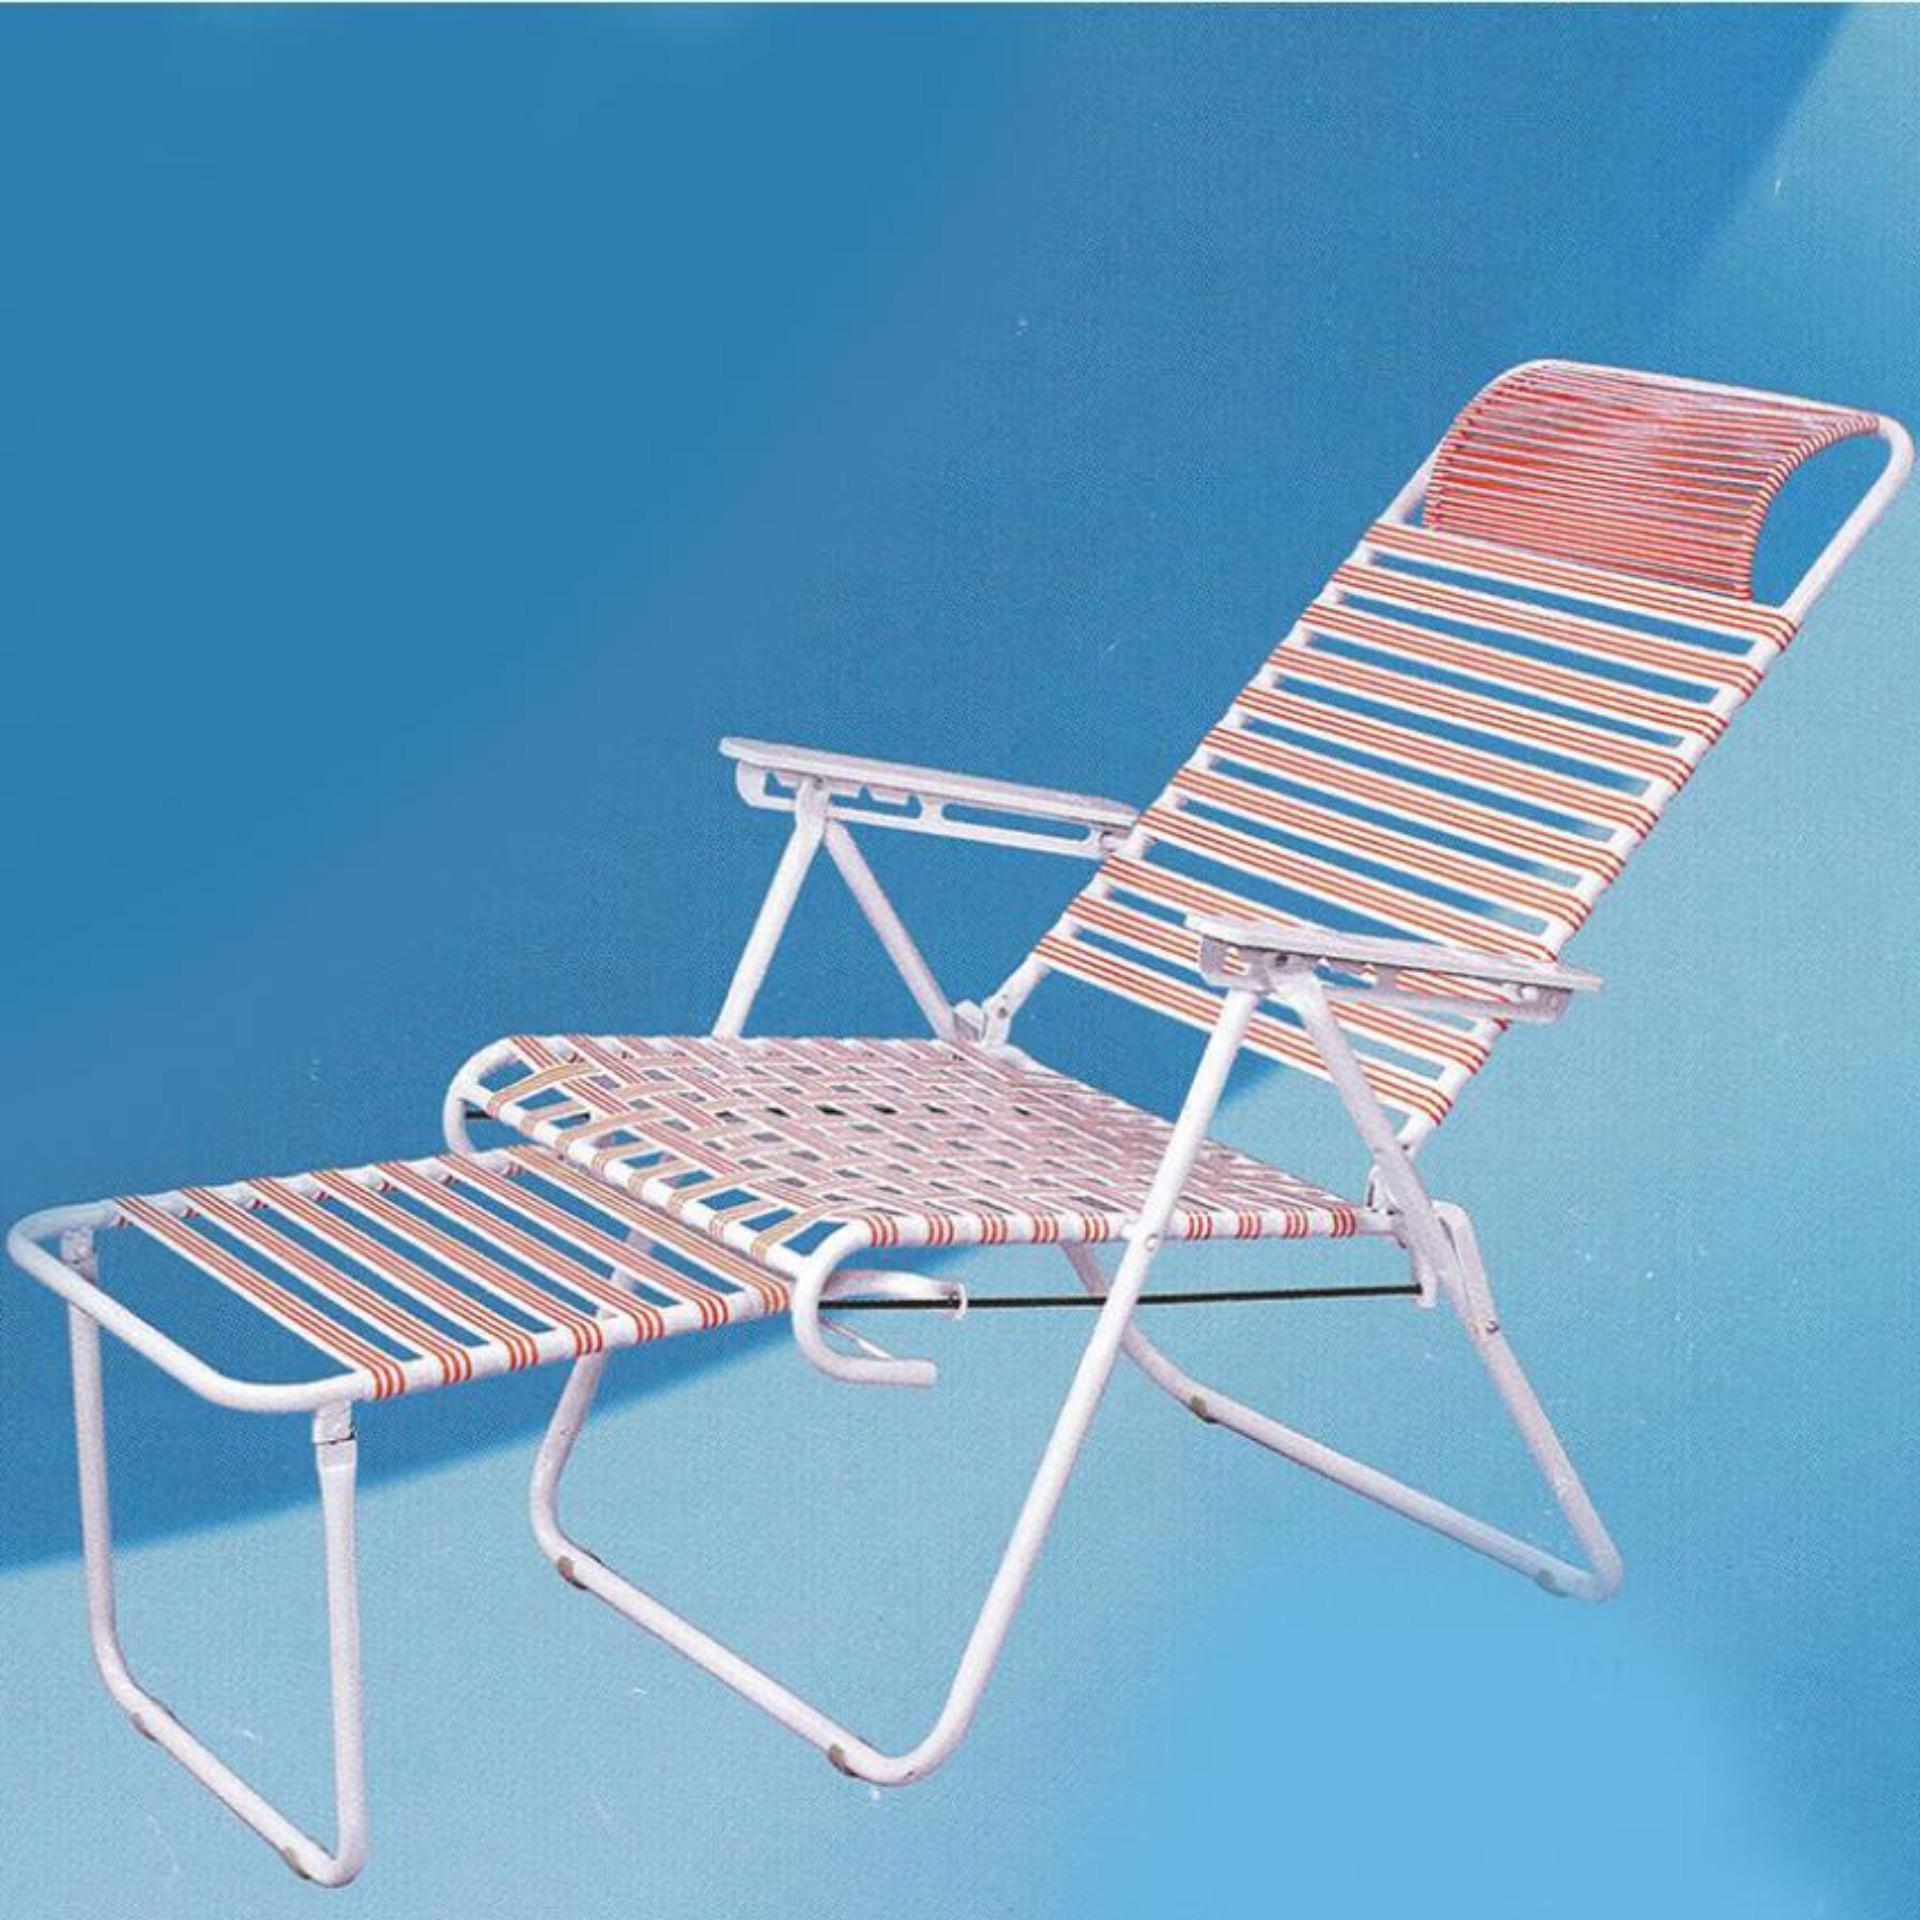 ReadyFixed Relax Lazy Chair/Nap Ch (end 4/28/2021 1200 AM)